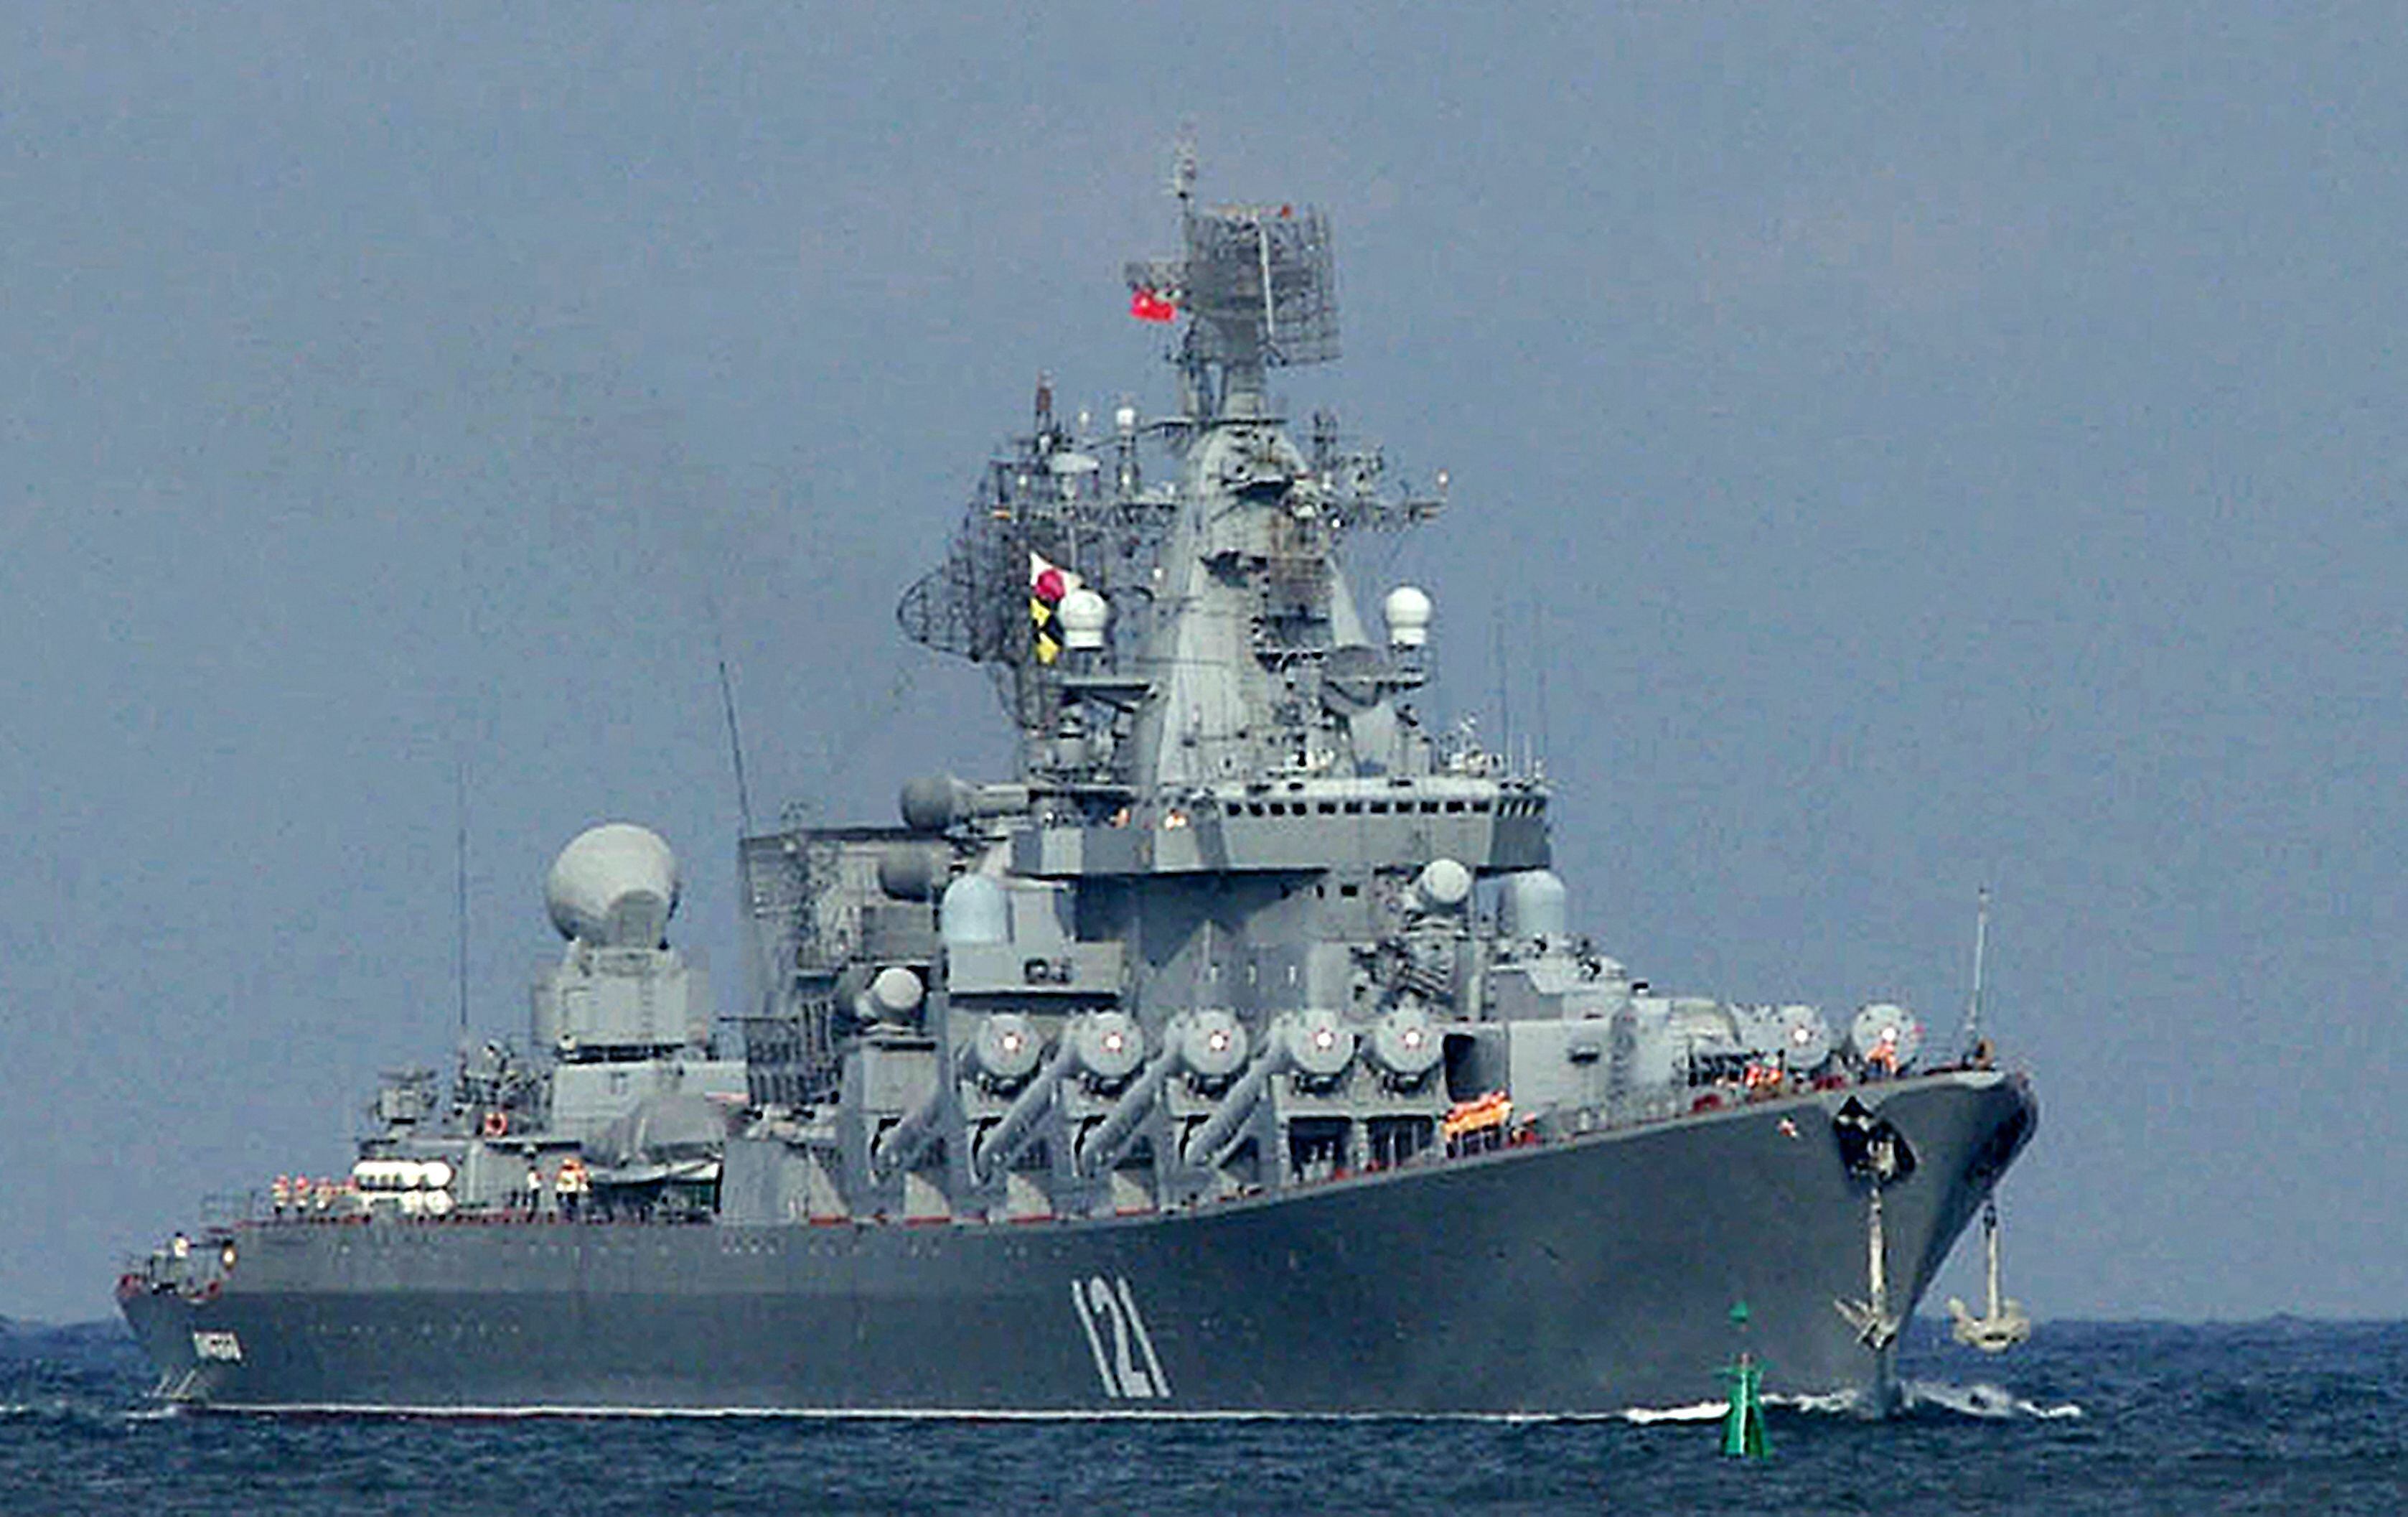 (FILES) This file photo taken on August 29, 2013 shows the Moskva, missile cruiser flagship of Russian Black Sea Fleet, entering Sevastopol bay. - Russia's Black Sea flagship involved in the naval assault on Ukraine has been "seriously damaged" by an explosion, state media reported April 14, 2022, as Moscow threatened to strike Kyiv's command centres. "As a result of a fire, ammunition detonated on the Moskva missile cruiser. The ship was seriously damaged," the Russian defence ministry was quoted as saying, adding that the cause of the fire was being determined and that the crew had been evacuated. (Photo by Vasiliy BATANOV / AFP)